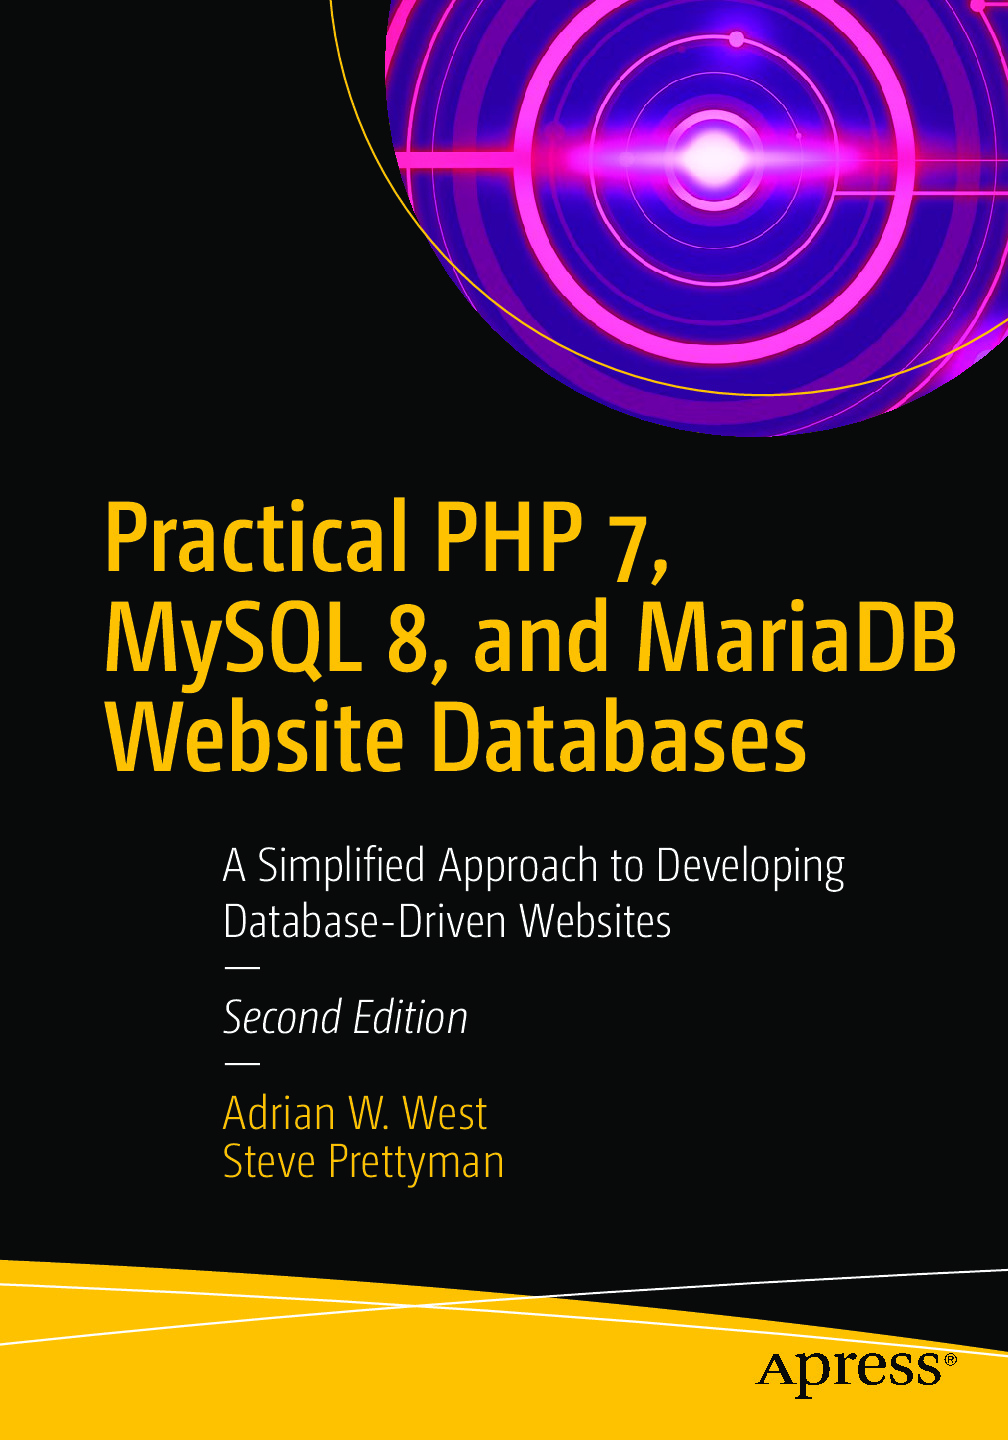 Practical PHP 7, MySQL 8, and MariaDB Website Databases_ A Simplified Approach to Developing Database-Driven Websites